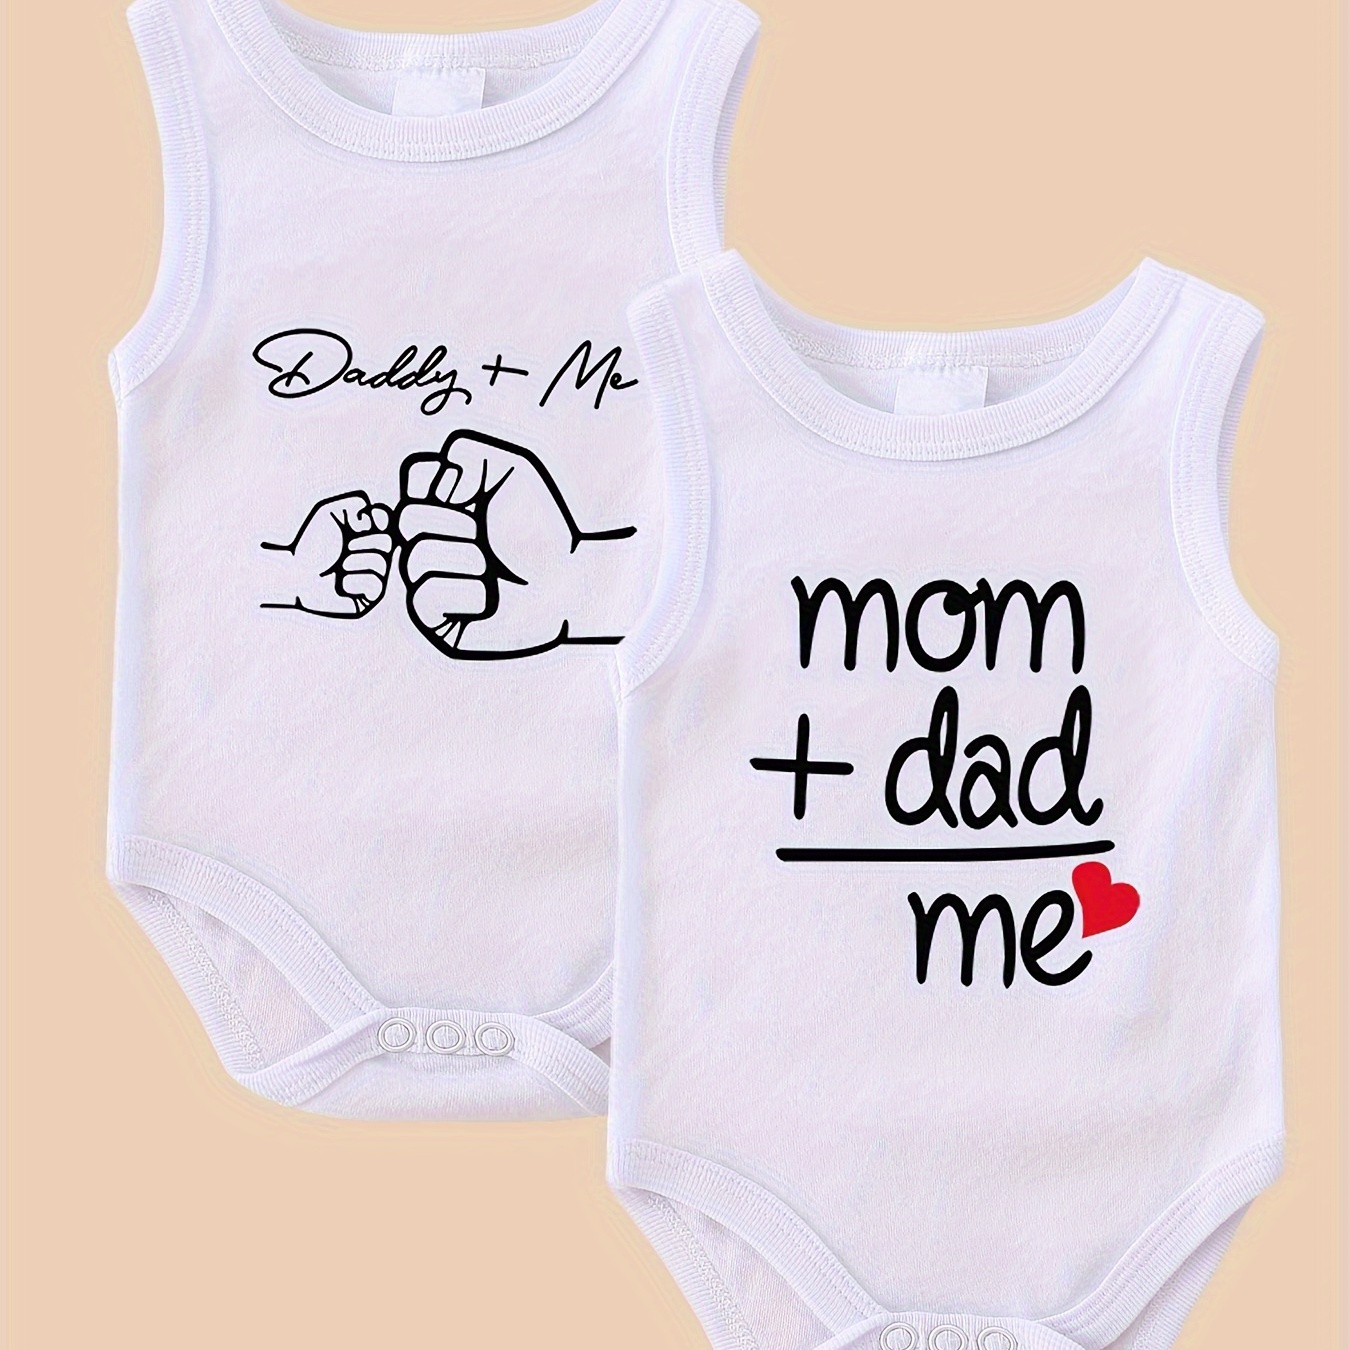 

2-pack Unisex Baby Sleeveless Bodysuits, "i Love Dad & Mom" 100% Cotton Onesies, Newborn Triangle Rompers For Summer